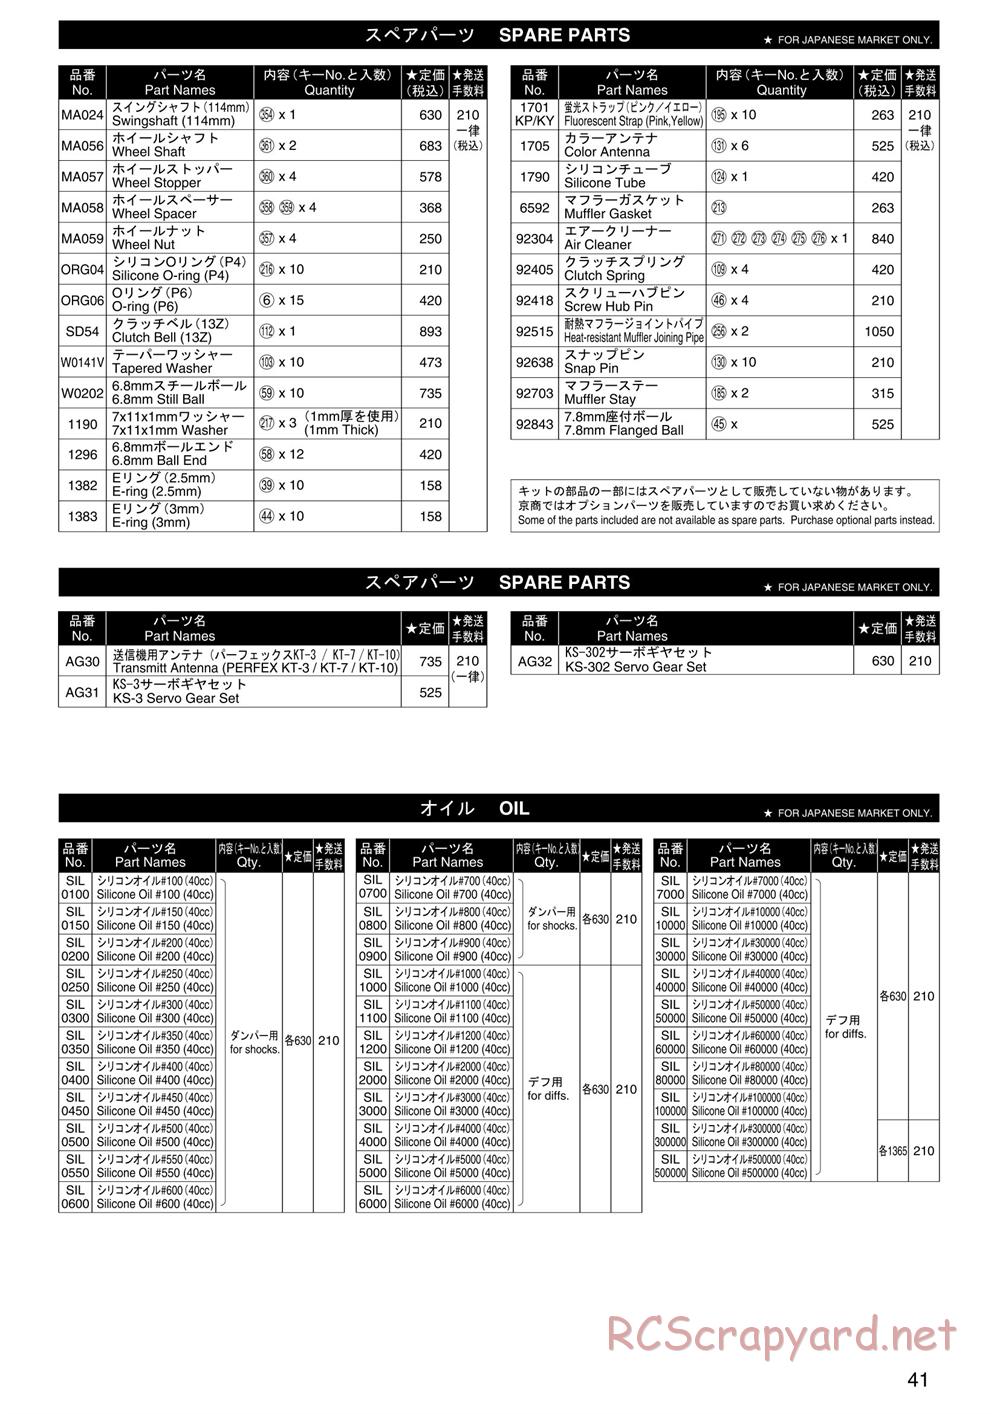 Kyosho - Inferno ST (2005) - Parts List - Page 2